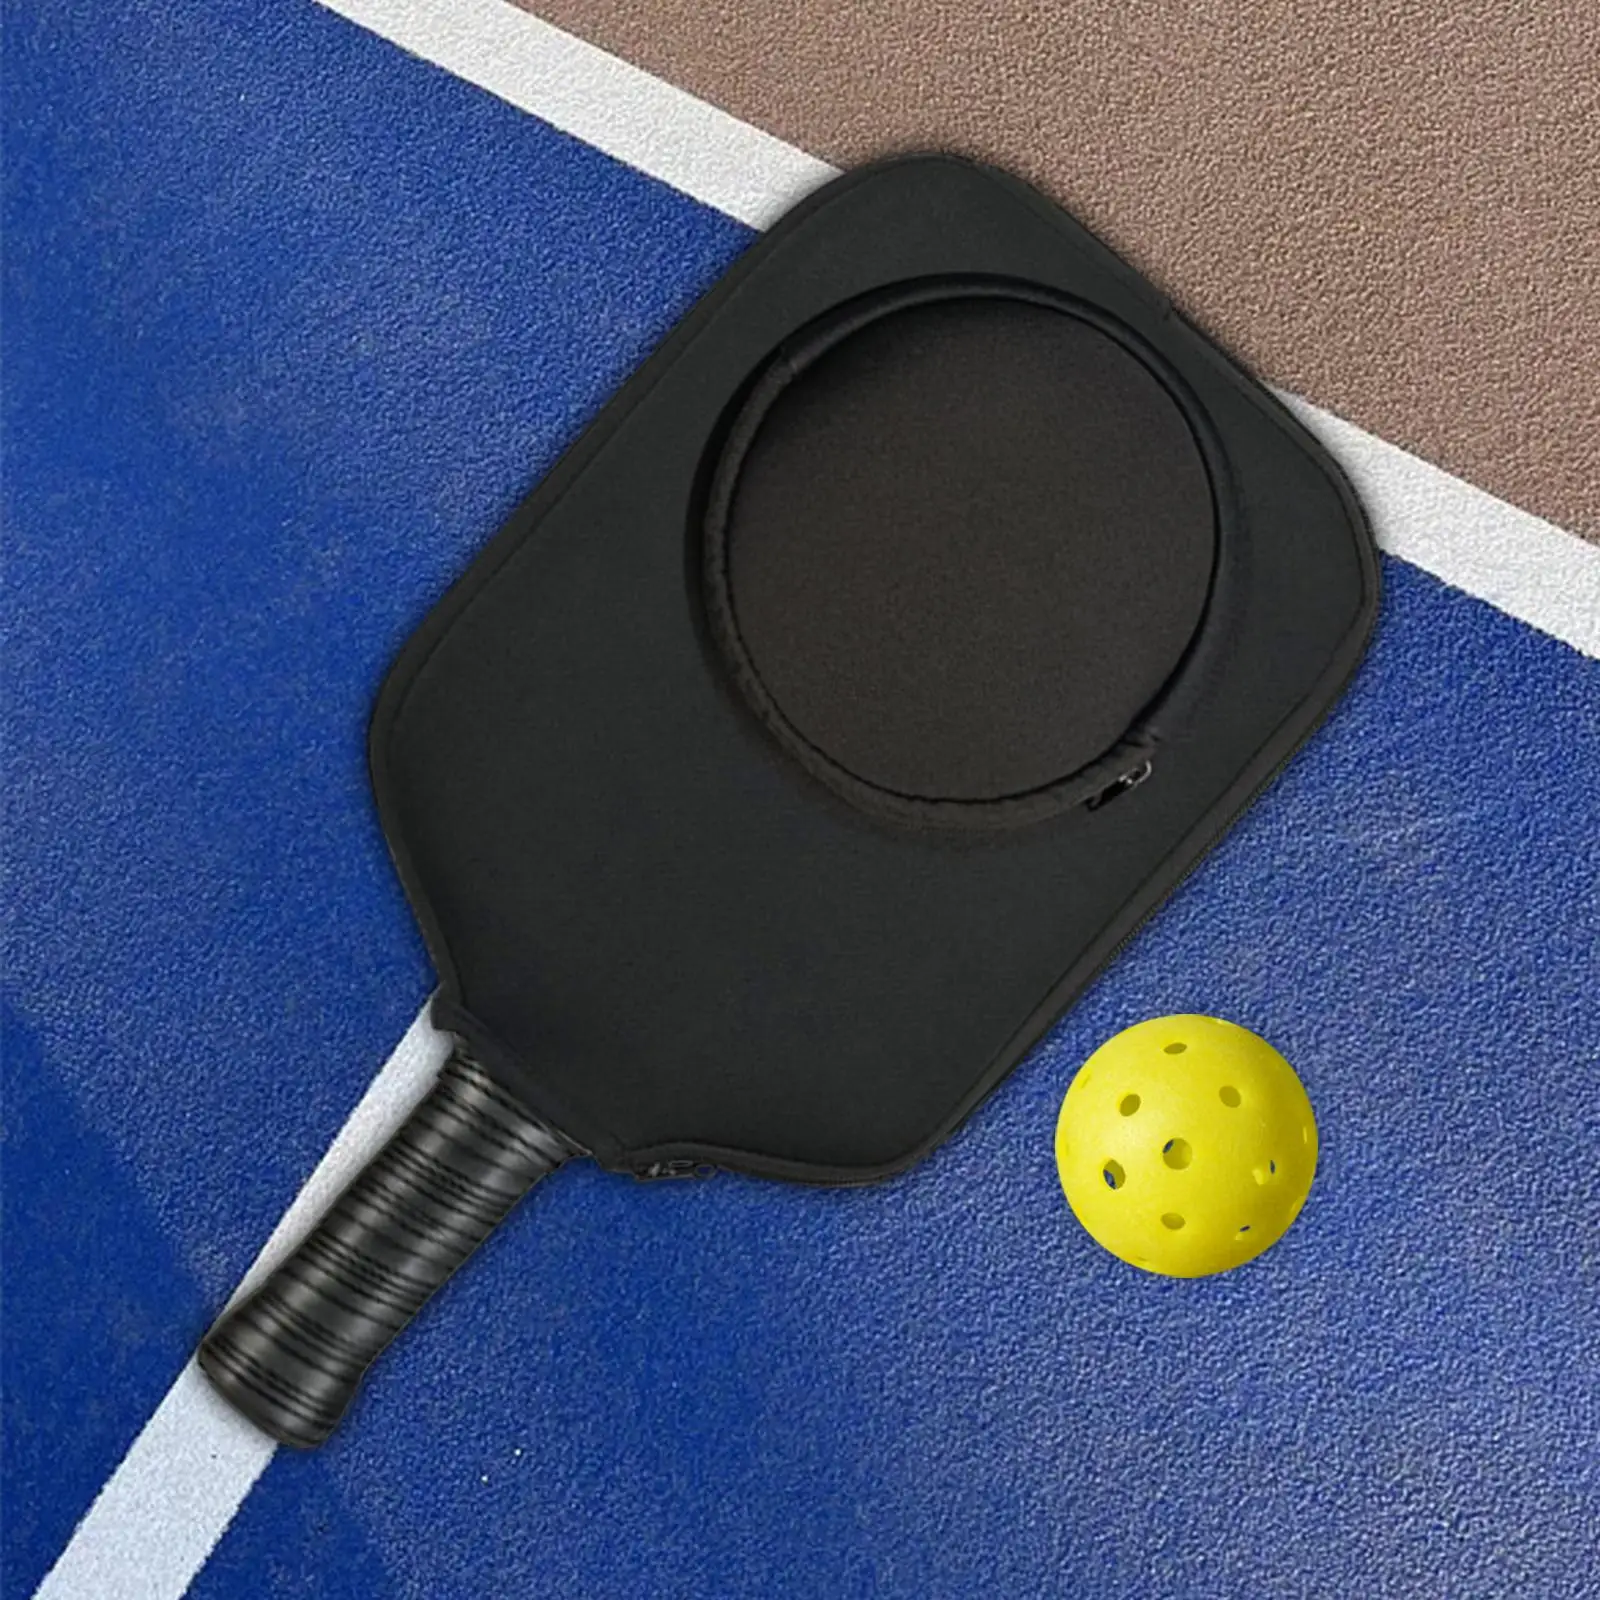 Pickleball Paddle Cover Pickleball Racket Sleeve Protector Storage Carrier